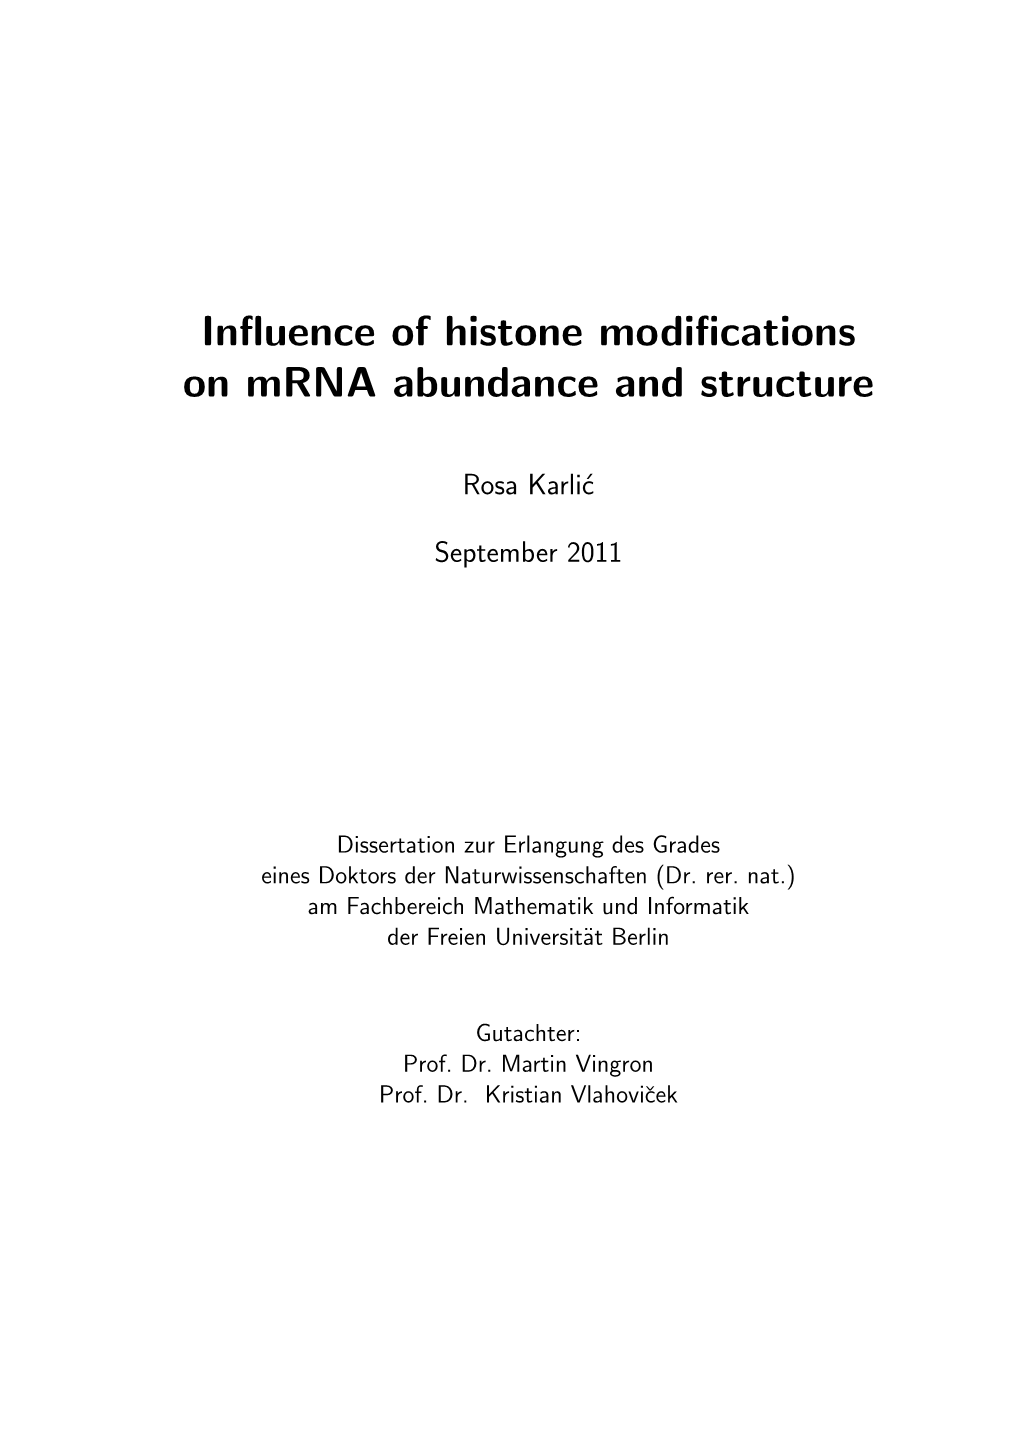 Influence of Histone Modifications on Mrna Abundance and Structure